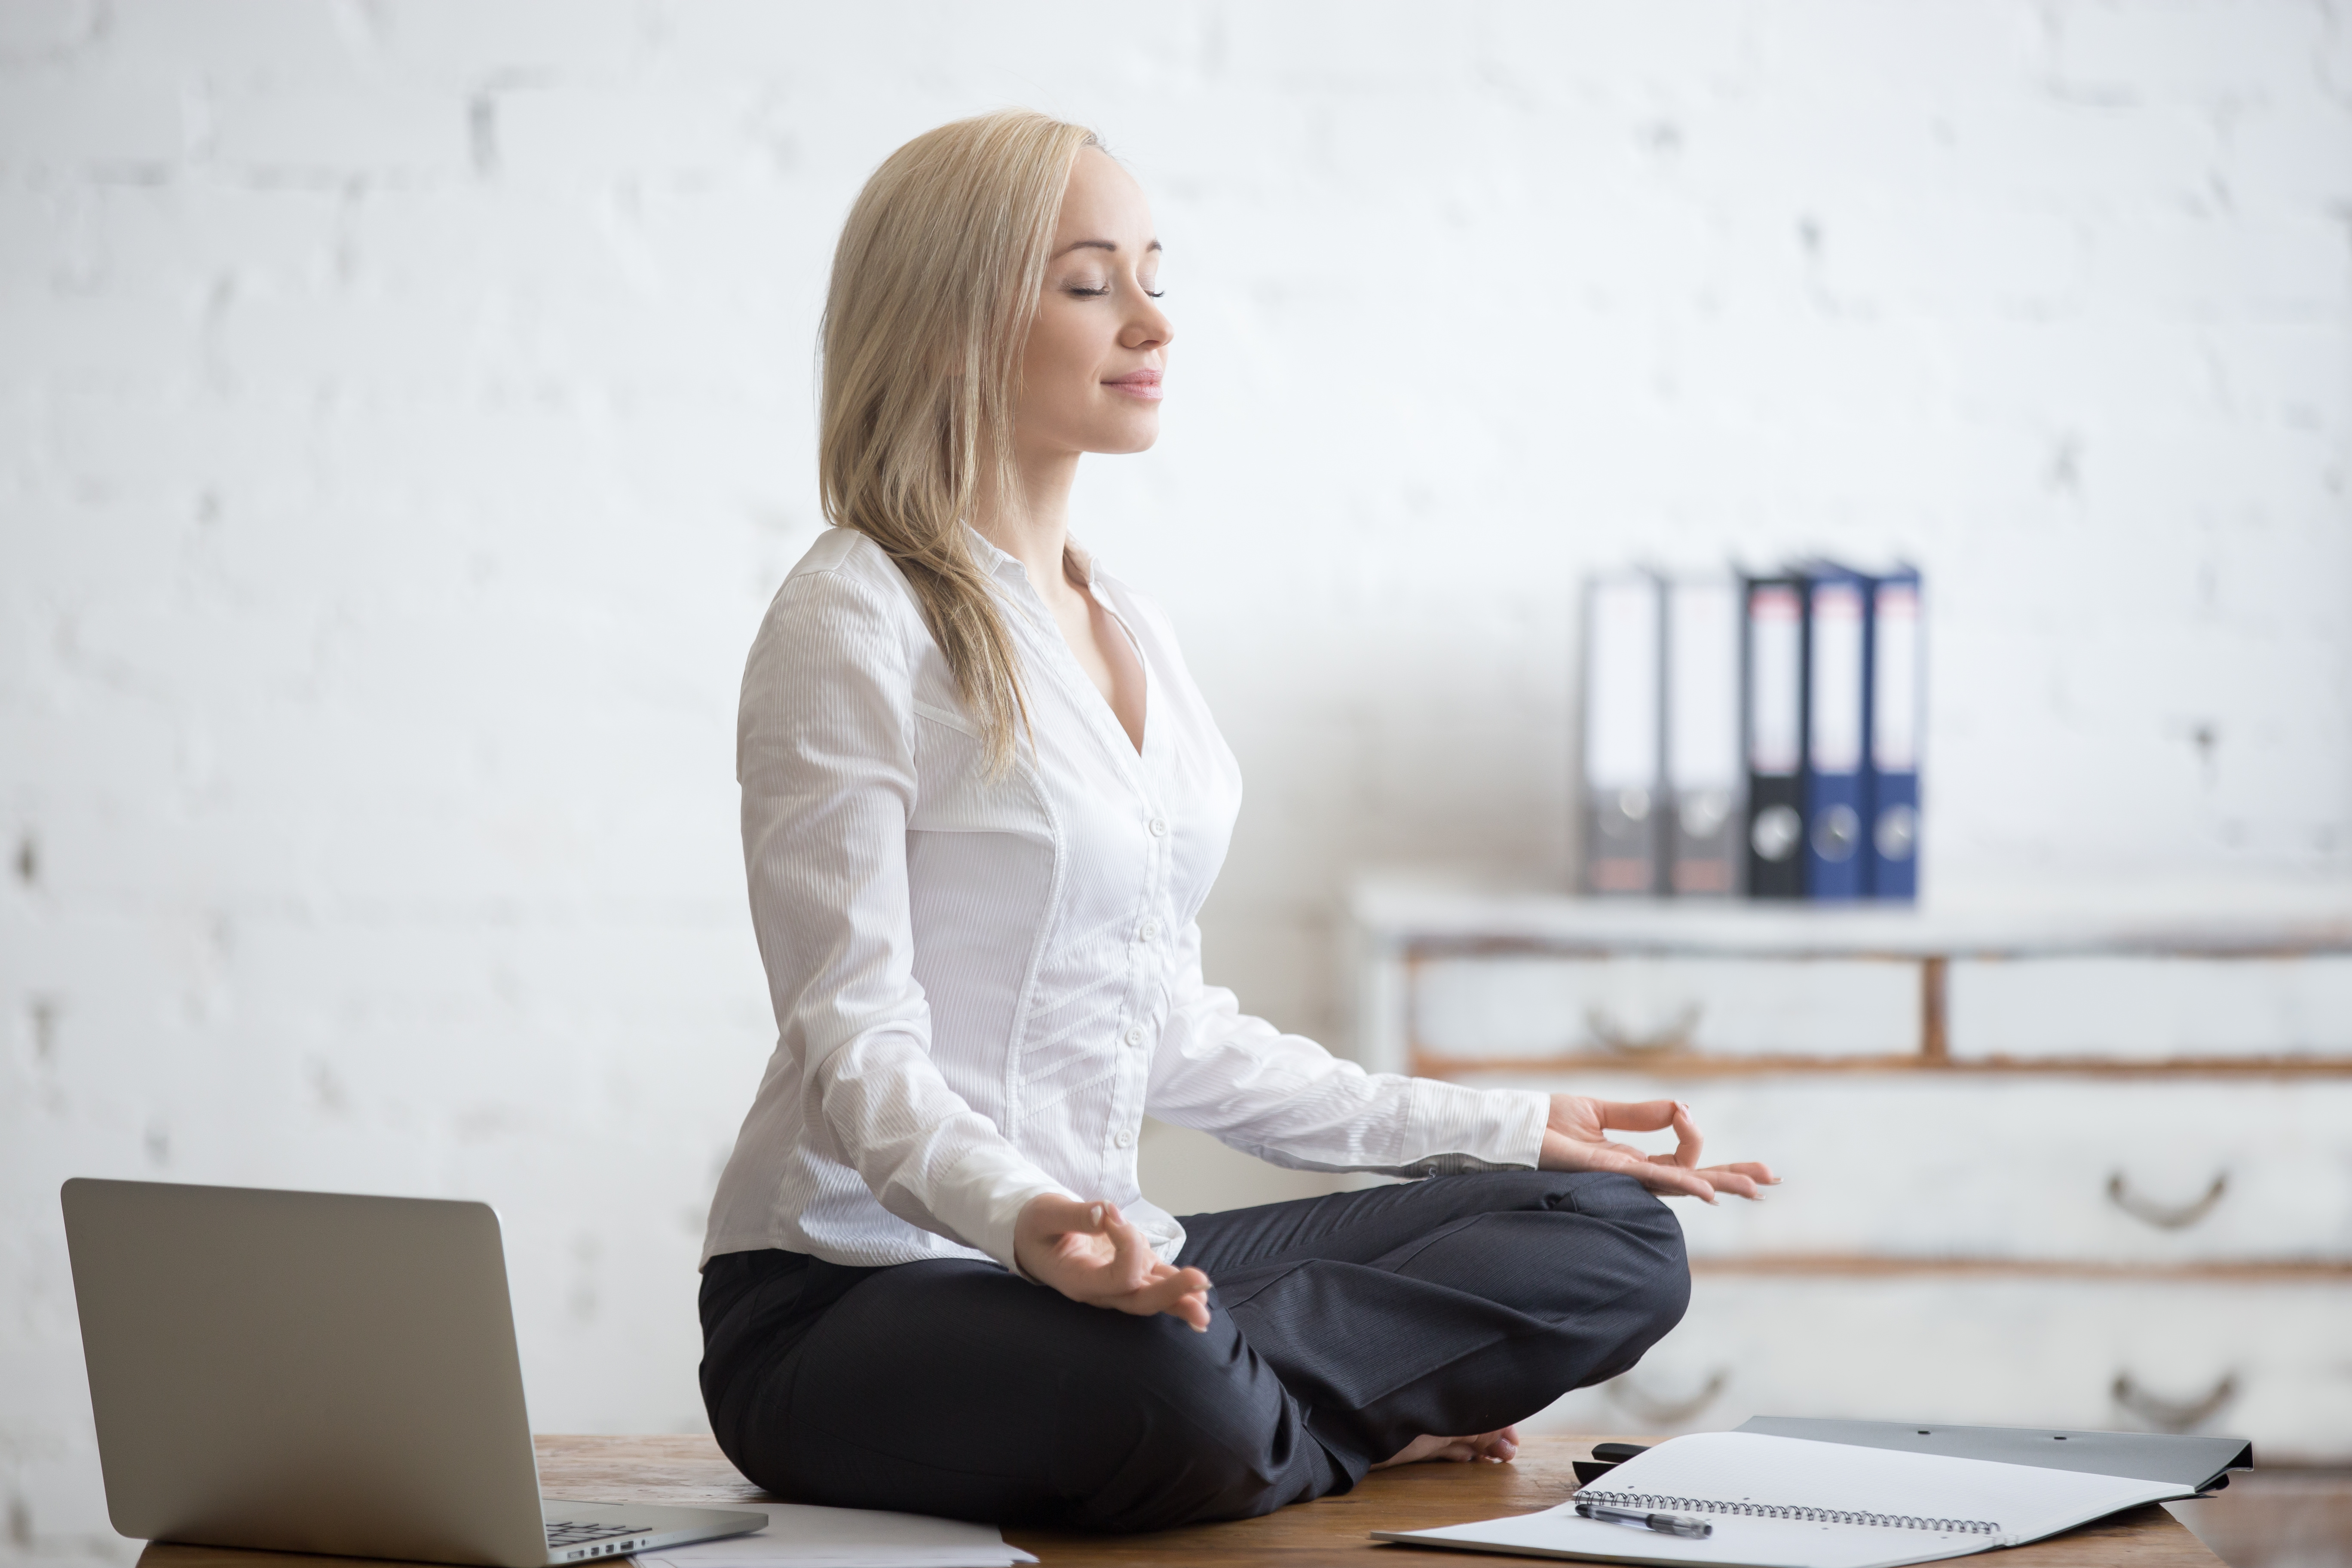 Healthy Work Habits: Start with Easy Desk Exercises